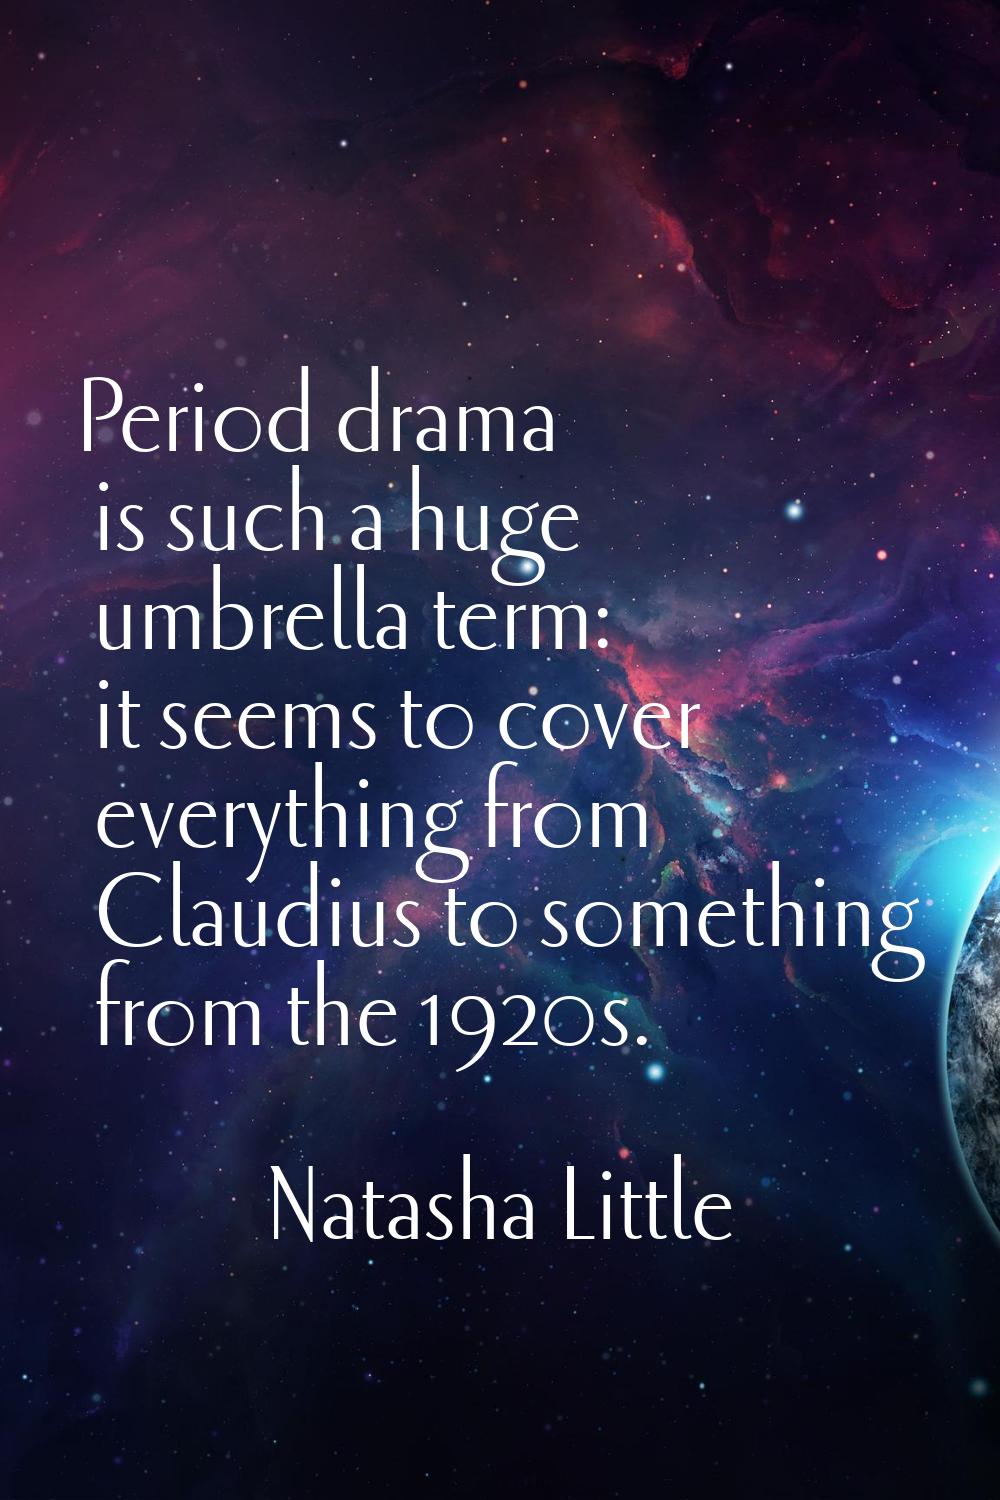 Period drama is such a huge umbrella term: it seems to cover everything from Claudius to something 